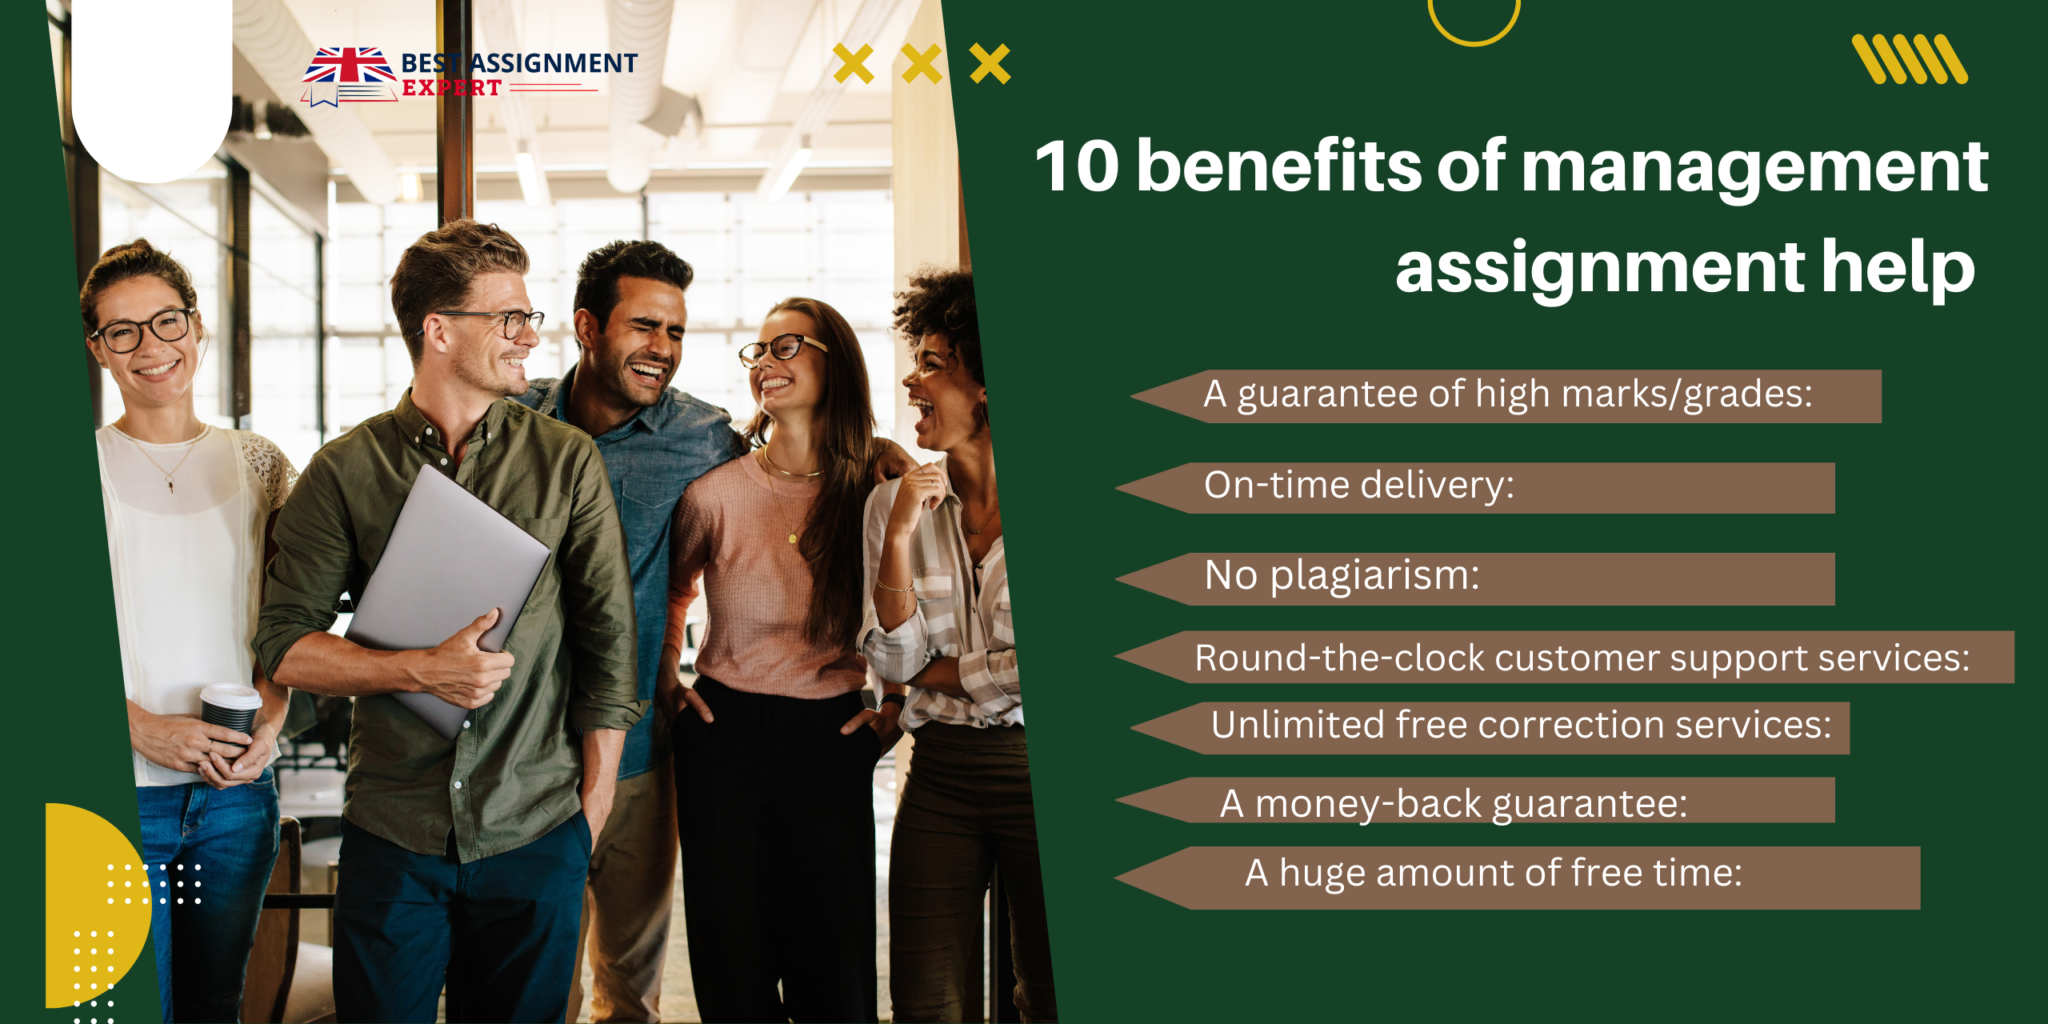 what are assignment benefits